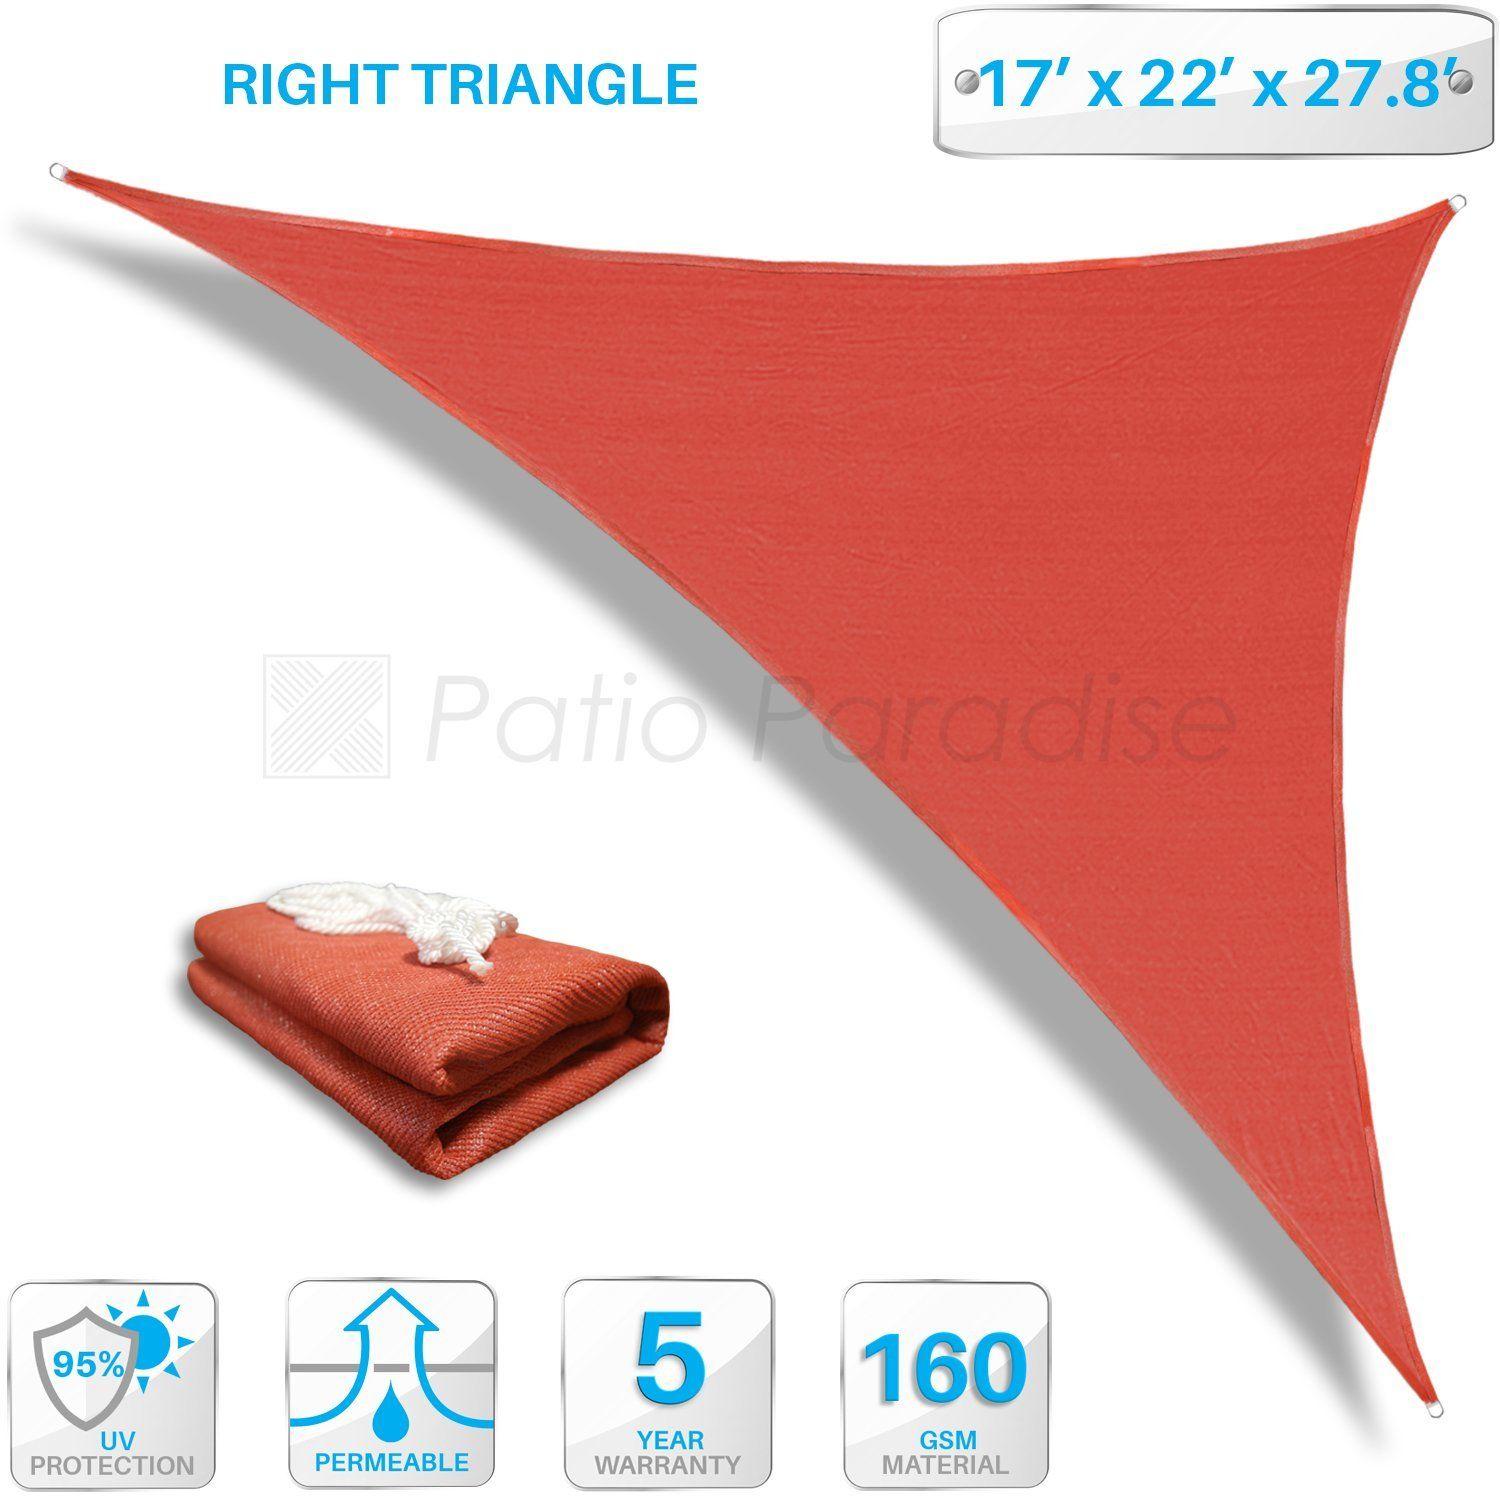 Right Triangle Red Logo - Buy Patio Paradise 17x22x27.8 Red Sun Shade Sail Right Triangle ...